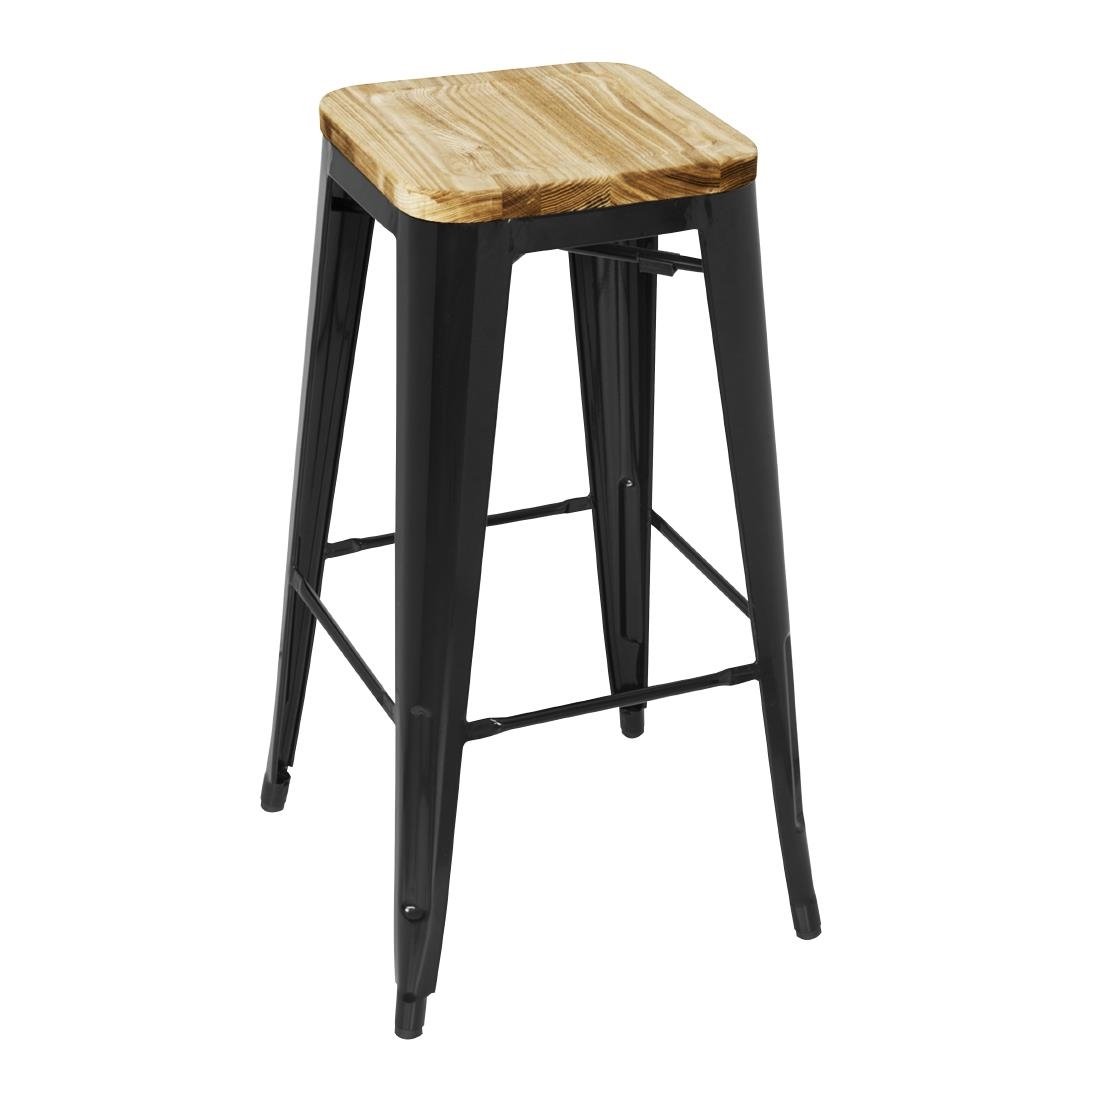 Black Steel Bar Stool with Wooden Top